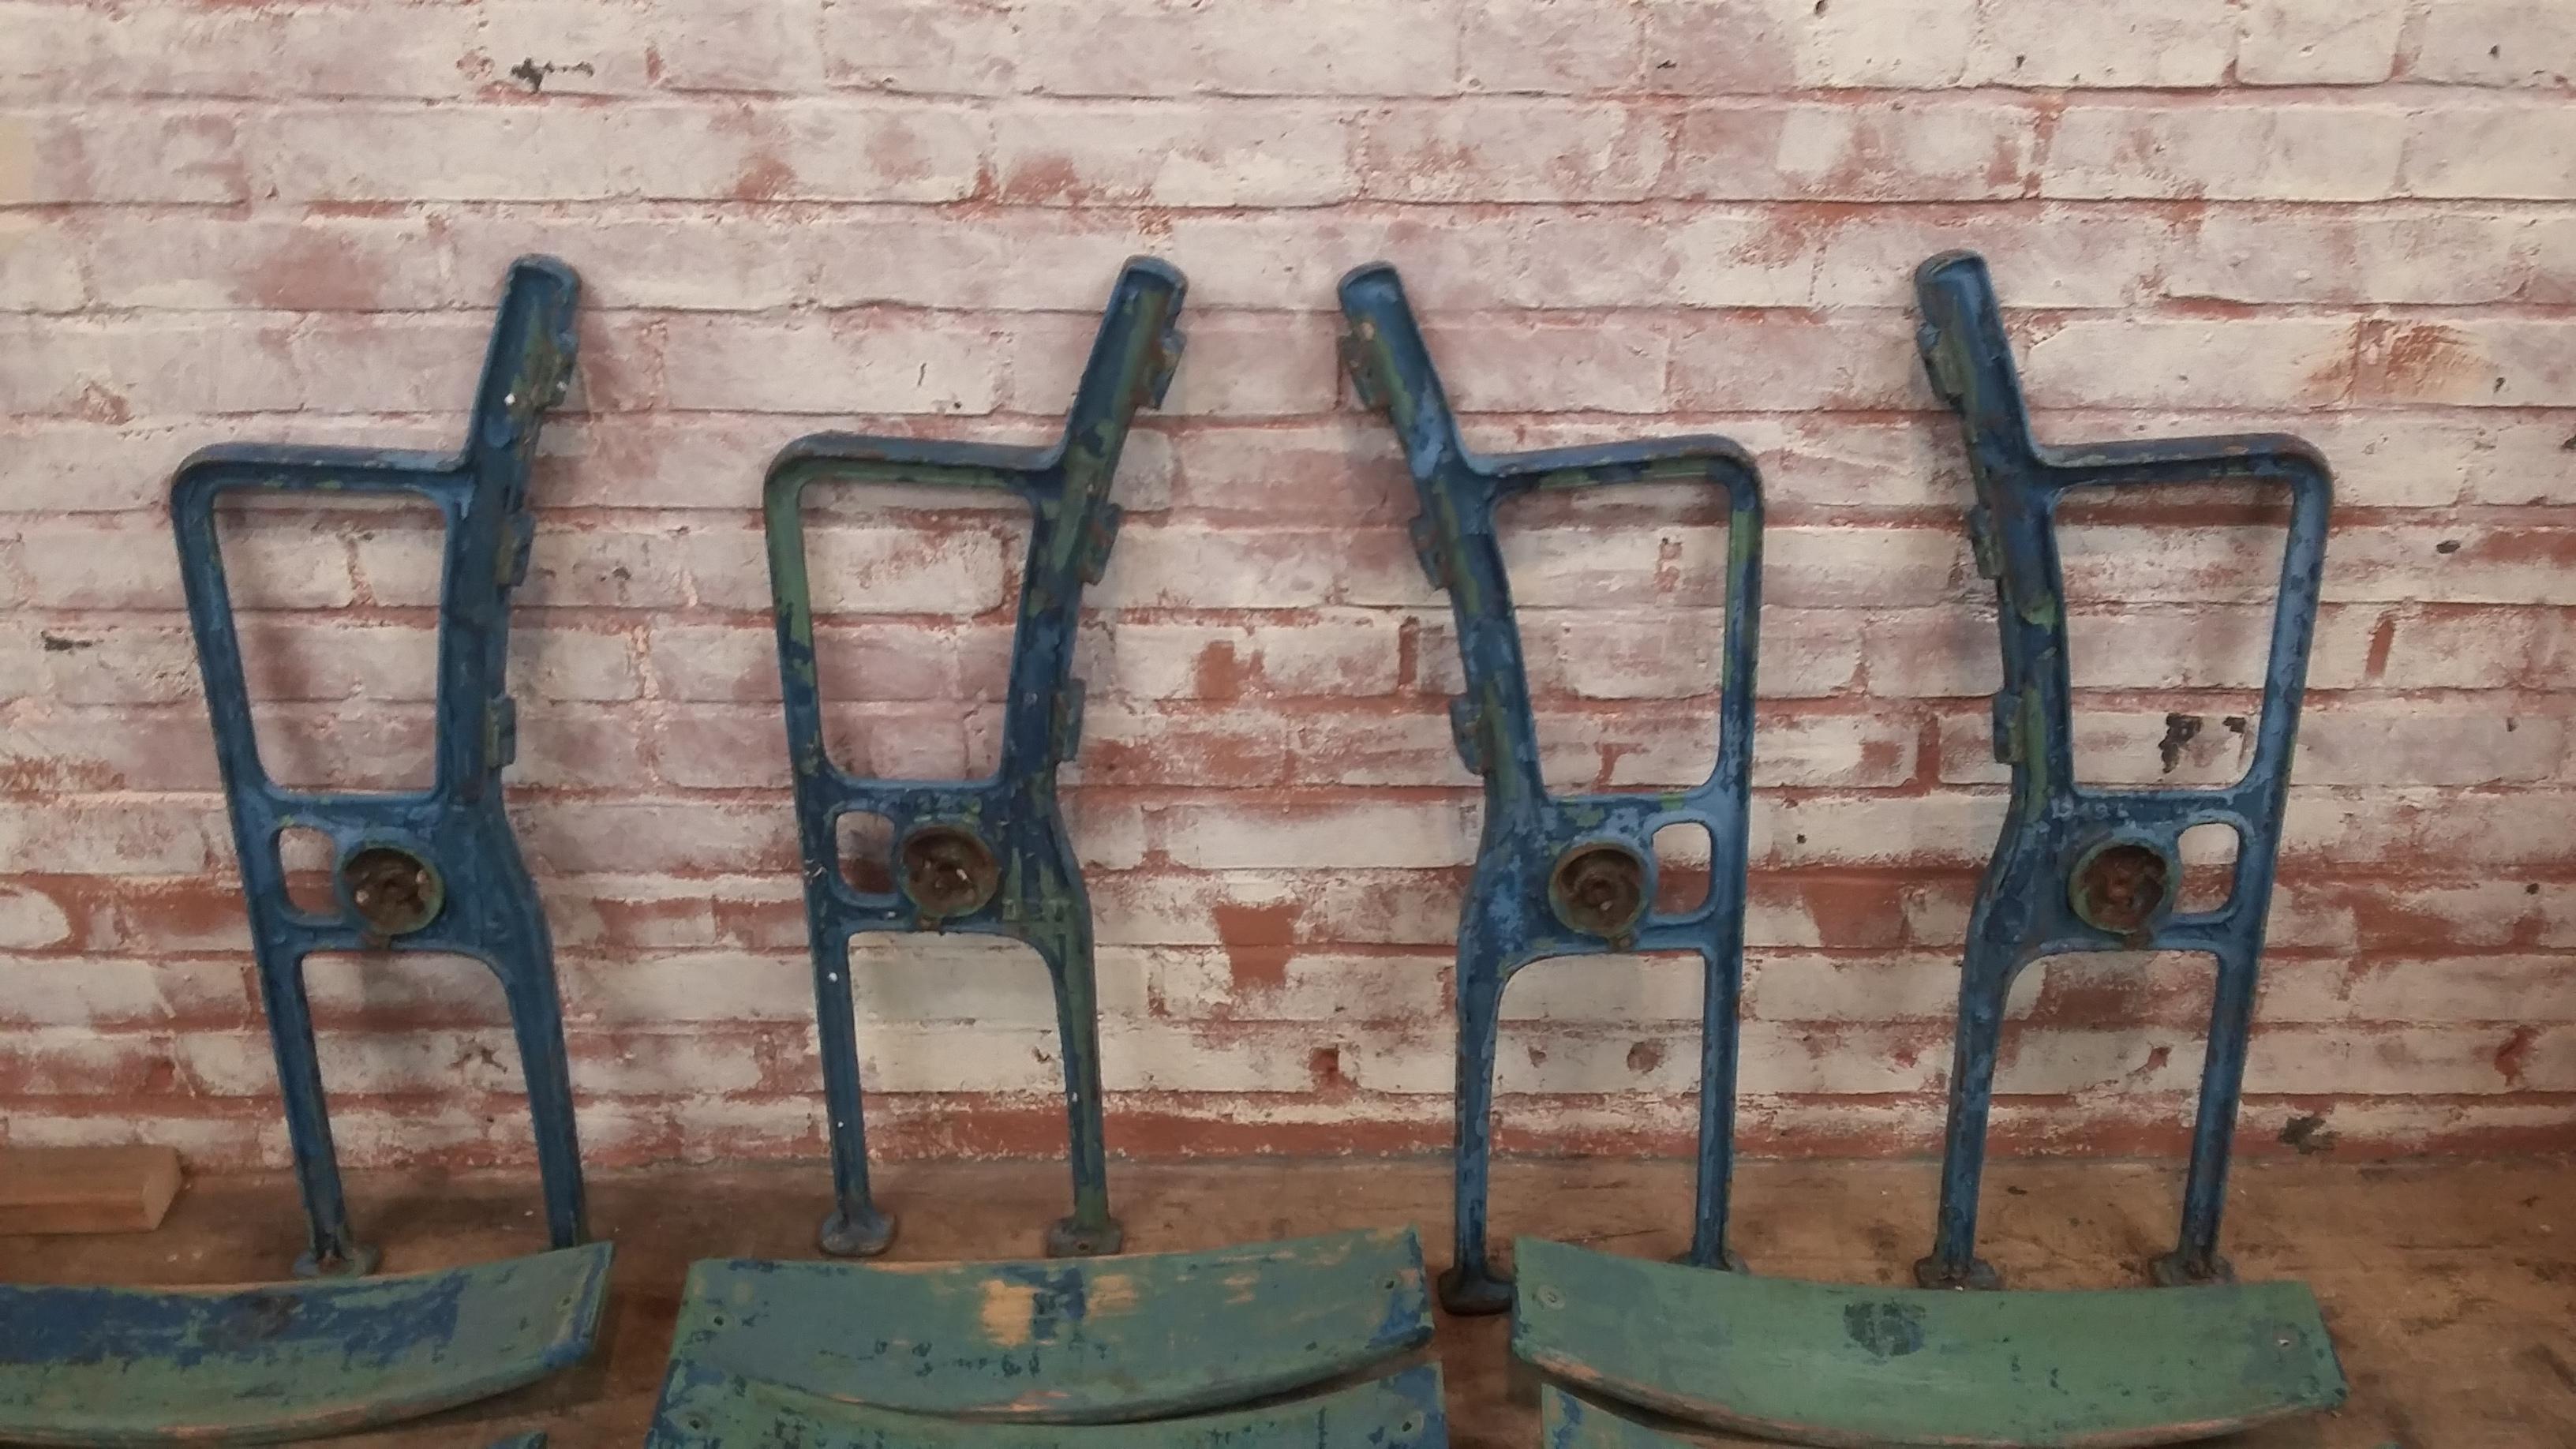 Authentic set of 3 Yankee Stadium seats. All complete. All wood seats and backs are in very good condition (no rot). All four cast iron supports original also and in great condition. The seats were originally listed as 